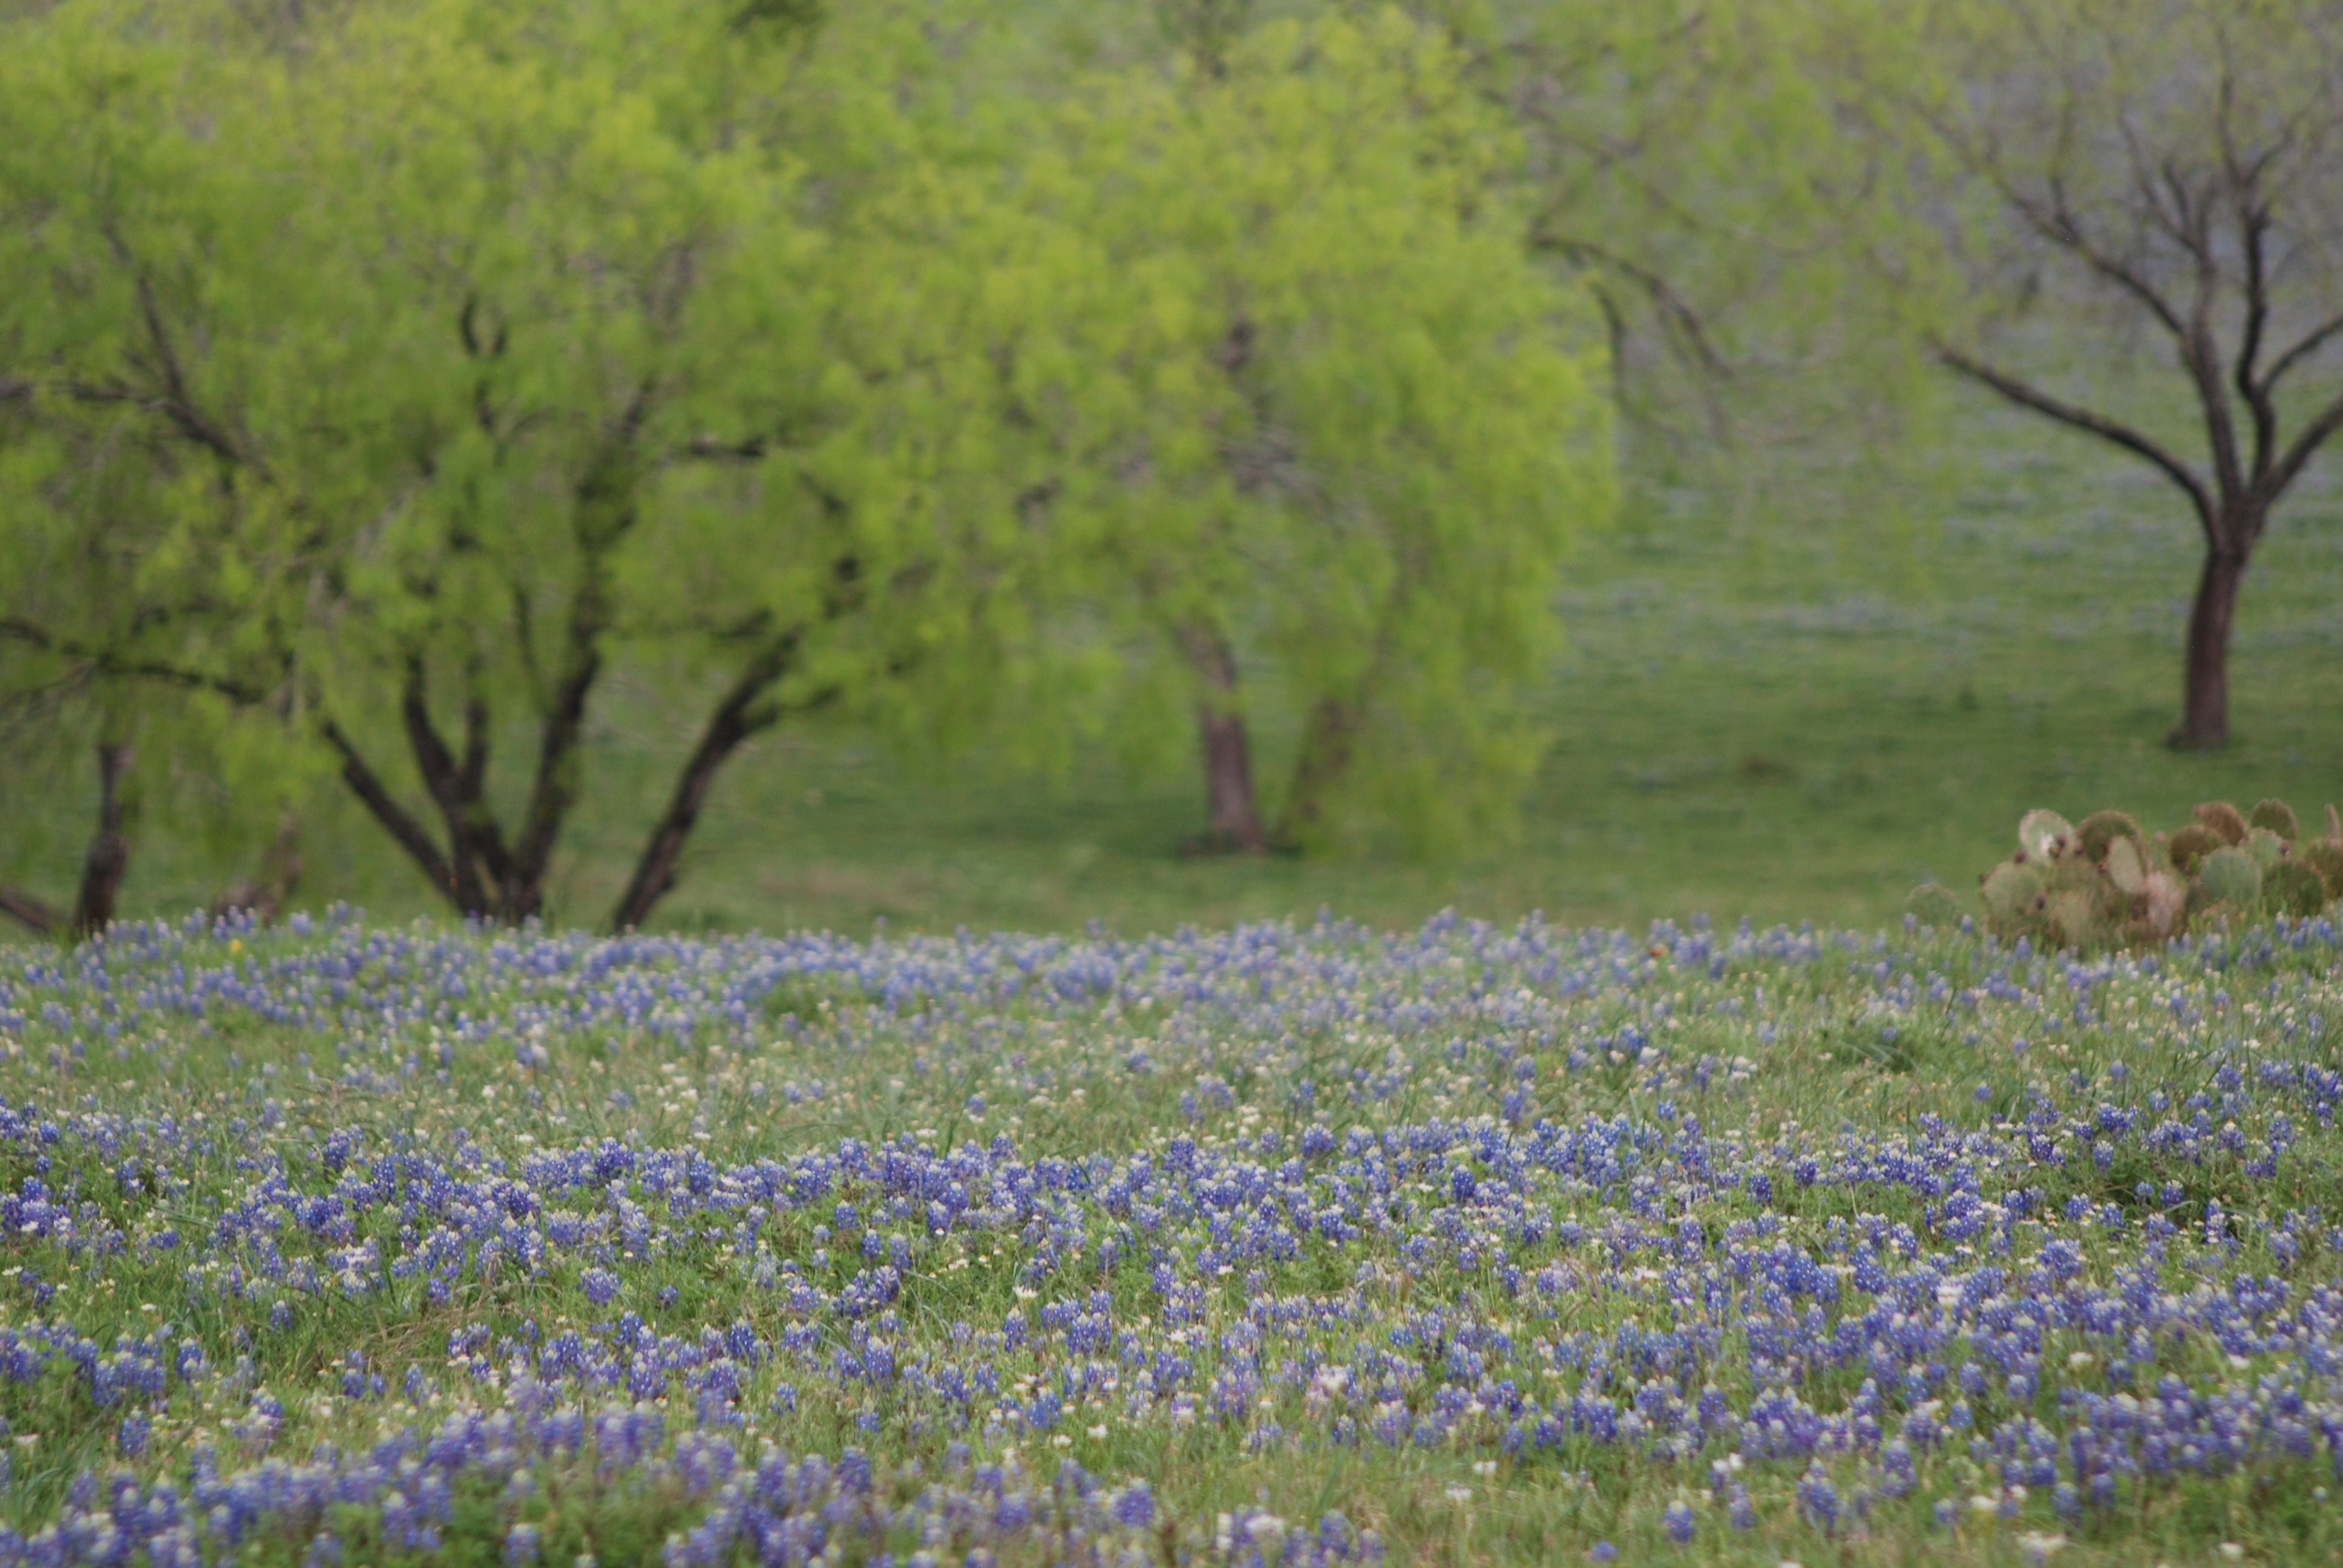 the bluebonnets were every where